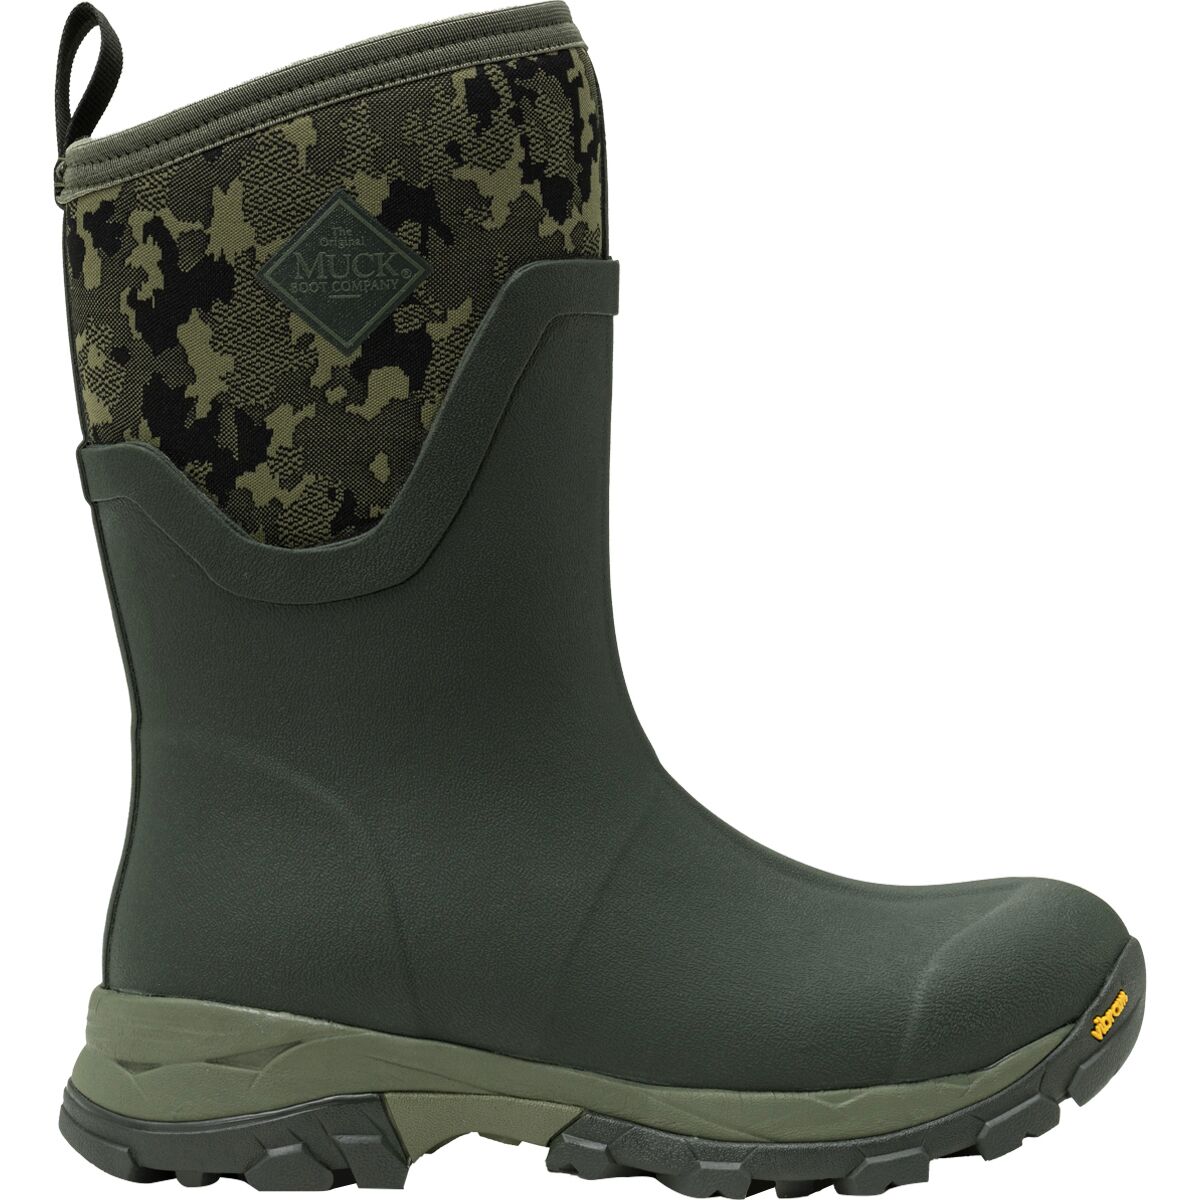 Muck Boots Arctic Ice AGAT Mid Boot - Women's